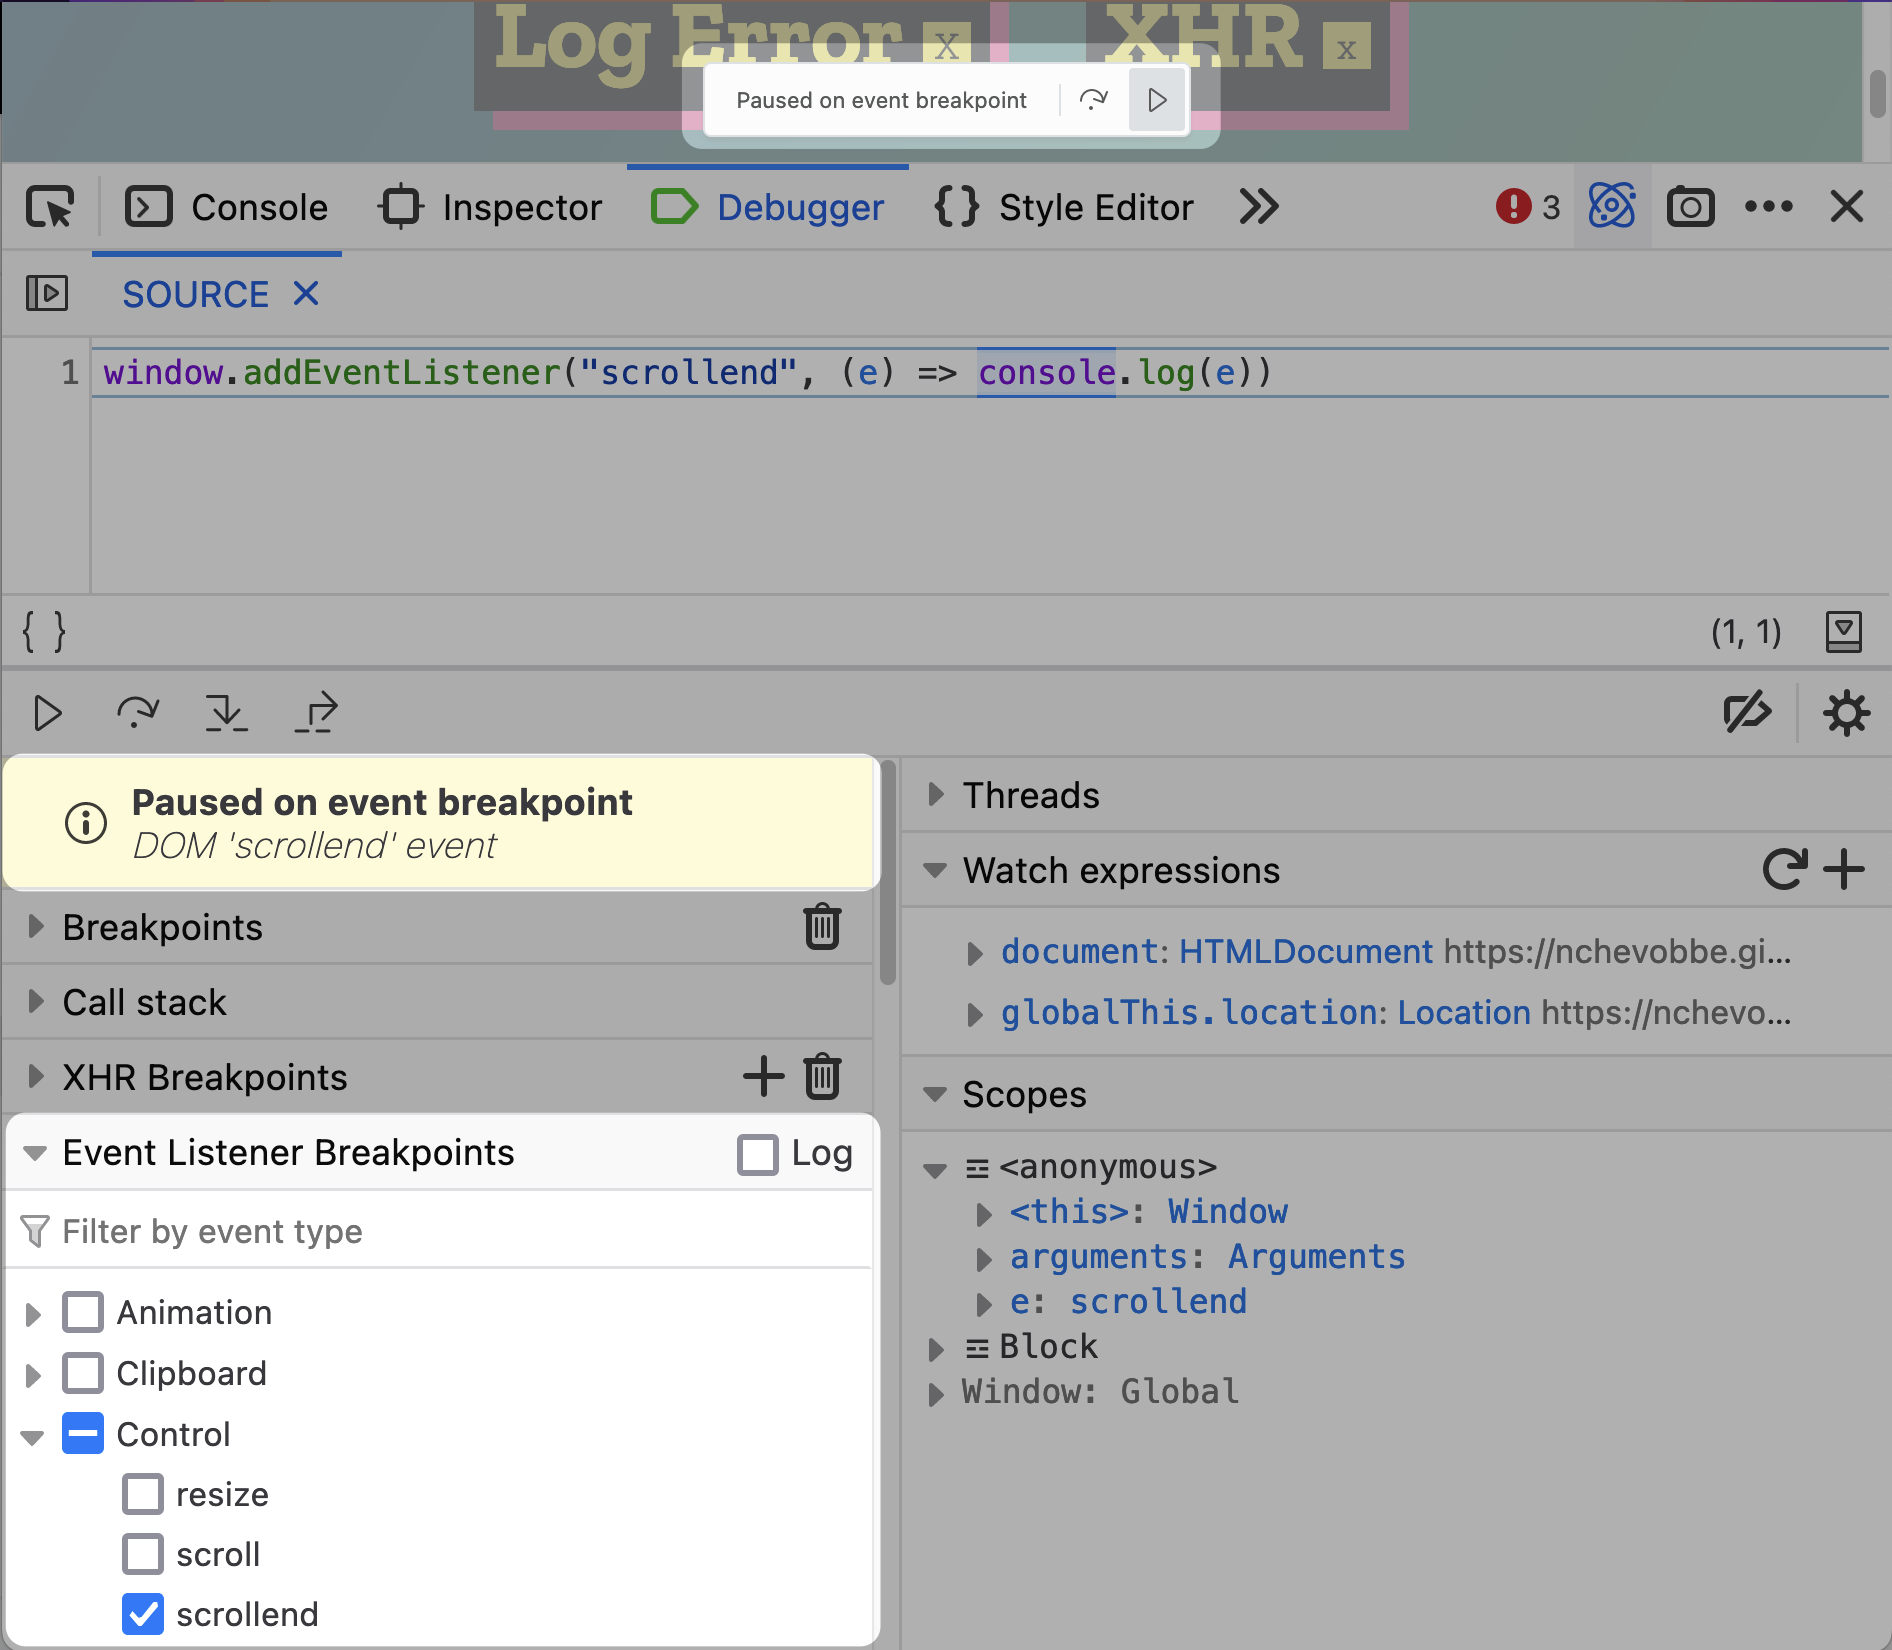 The Firefox debugger panel is open and is paused on an event breakpoint. Informational text is present saying: "Paused on event breakpoint. DOM 'scrollend' event". A list of Event Listener Breakpoints is also highlighted showing that the debugger can break anytime "scrollend" events fire.